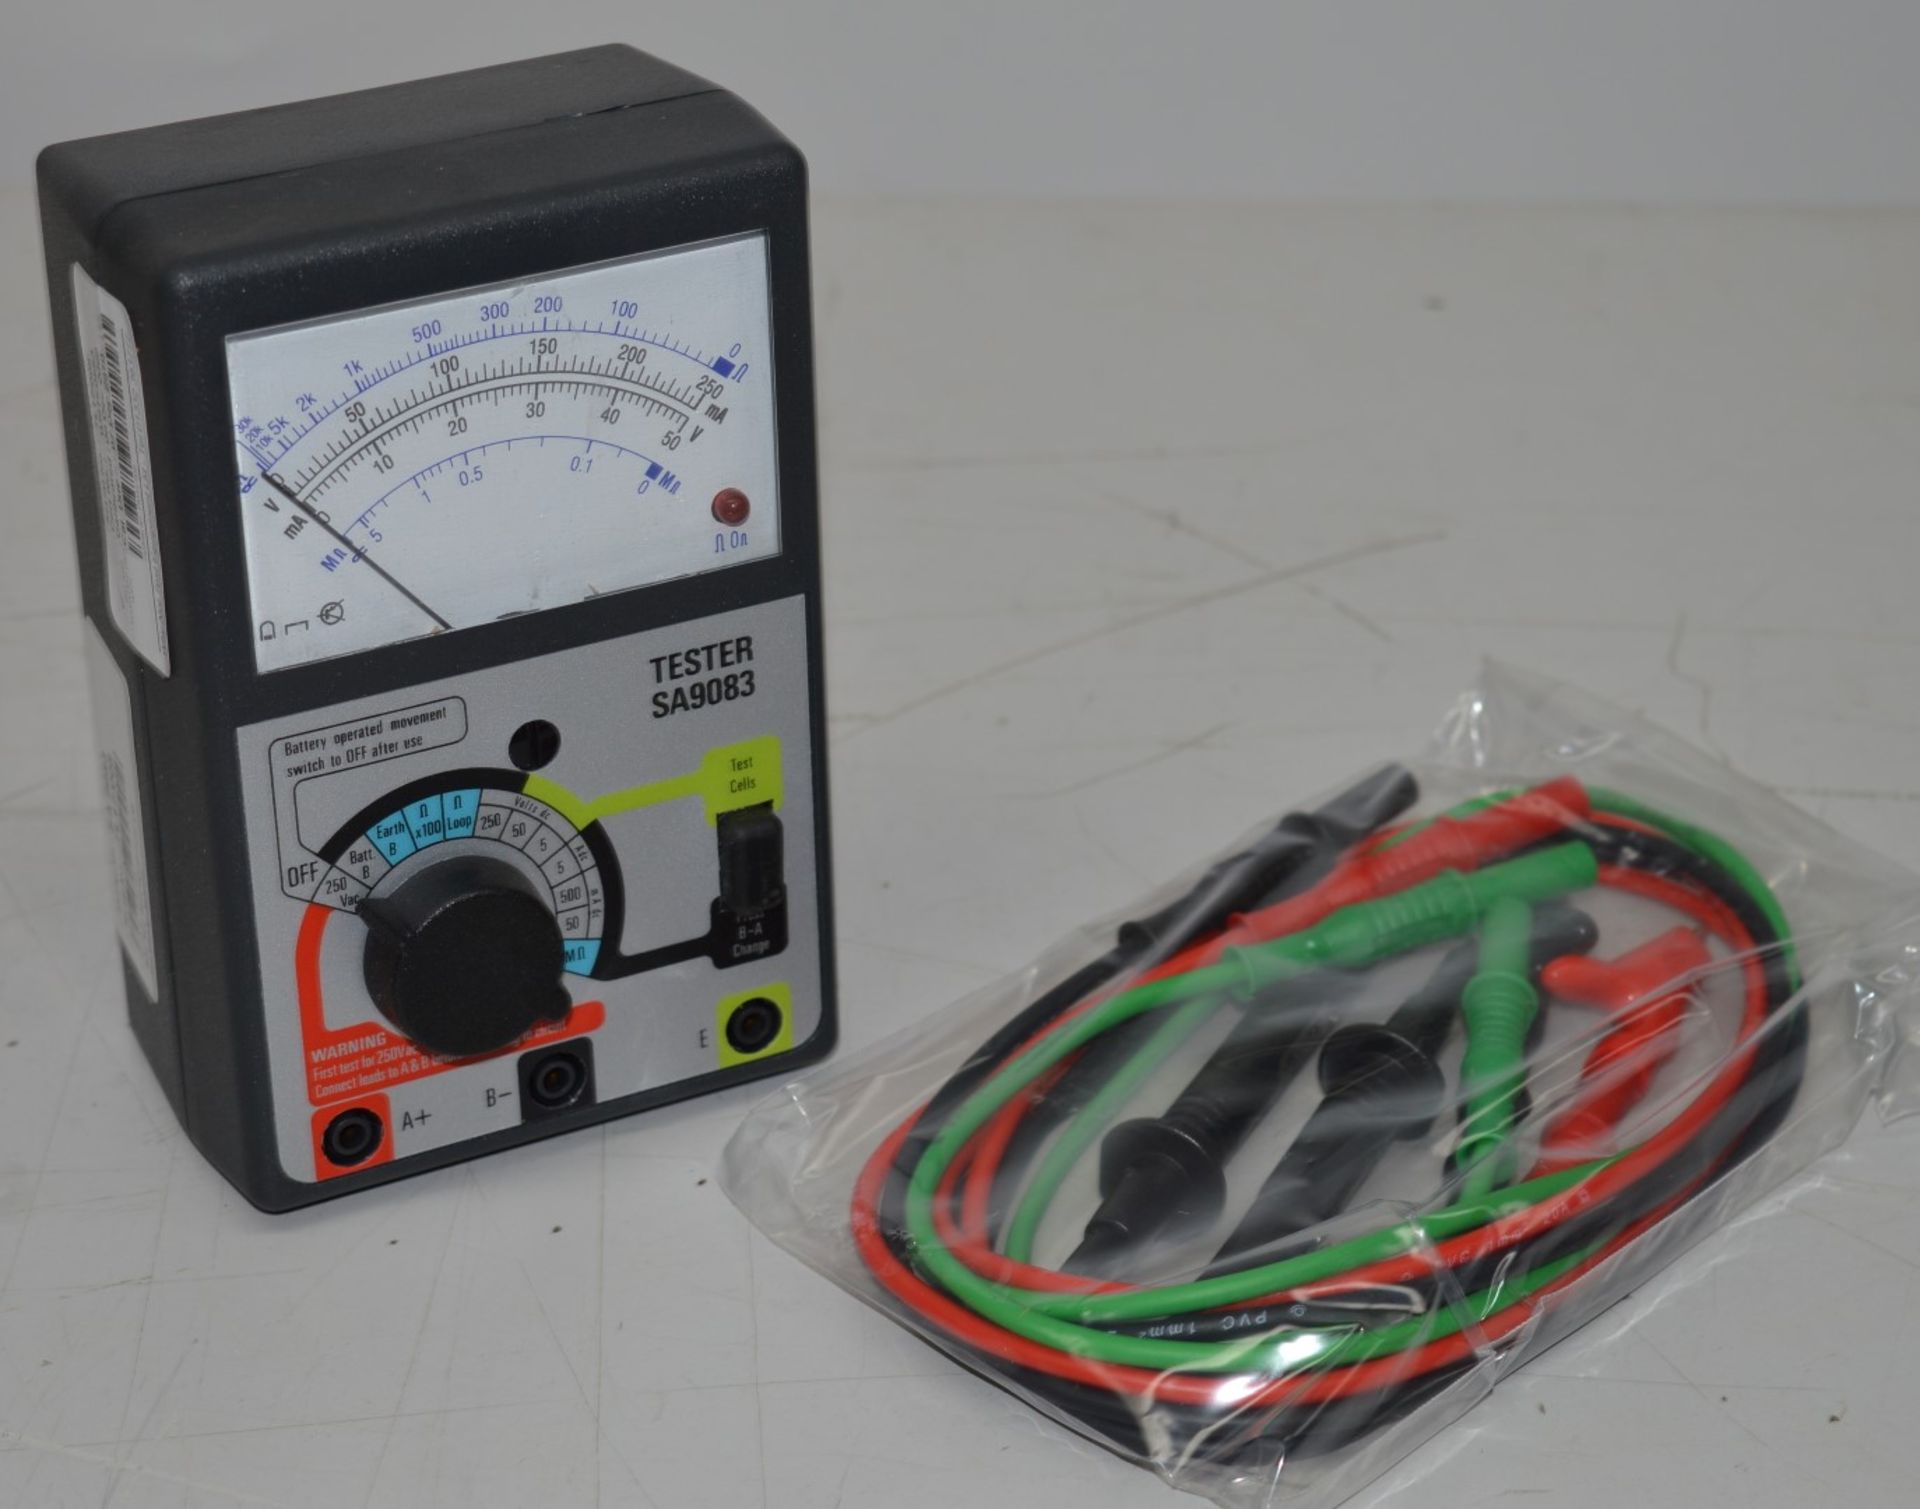 1 x Mills SA9083 Multimeter - Suitable For Telephone Engineers in Maintenance Testing - With Carry